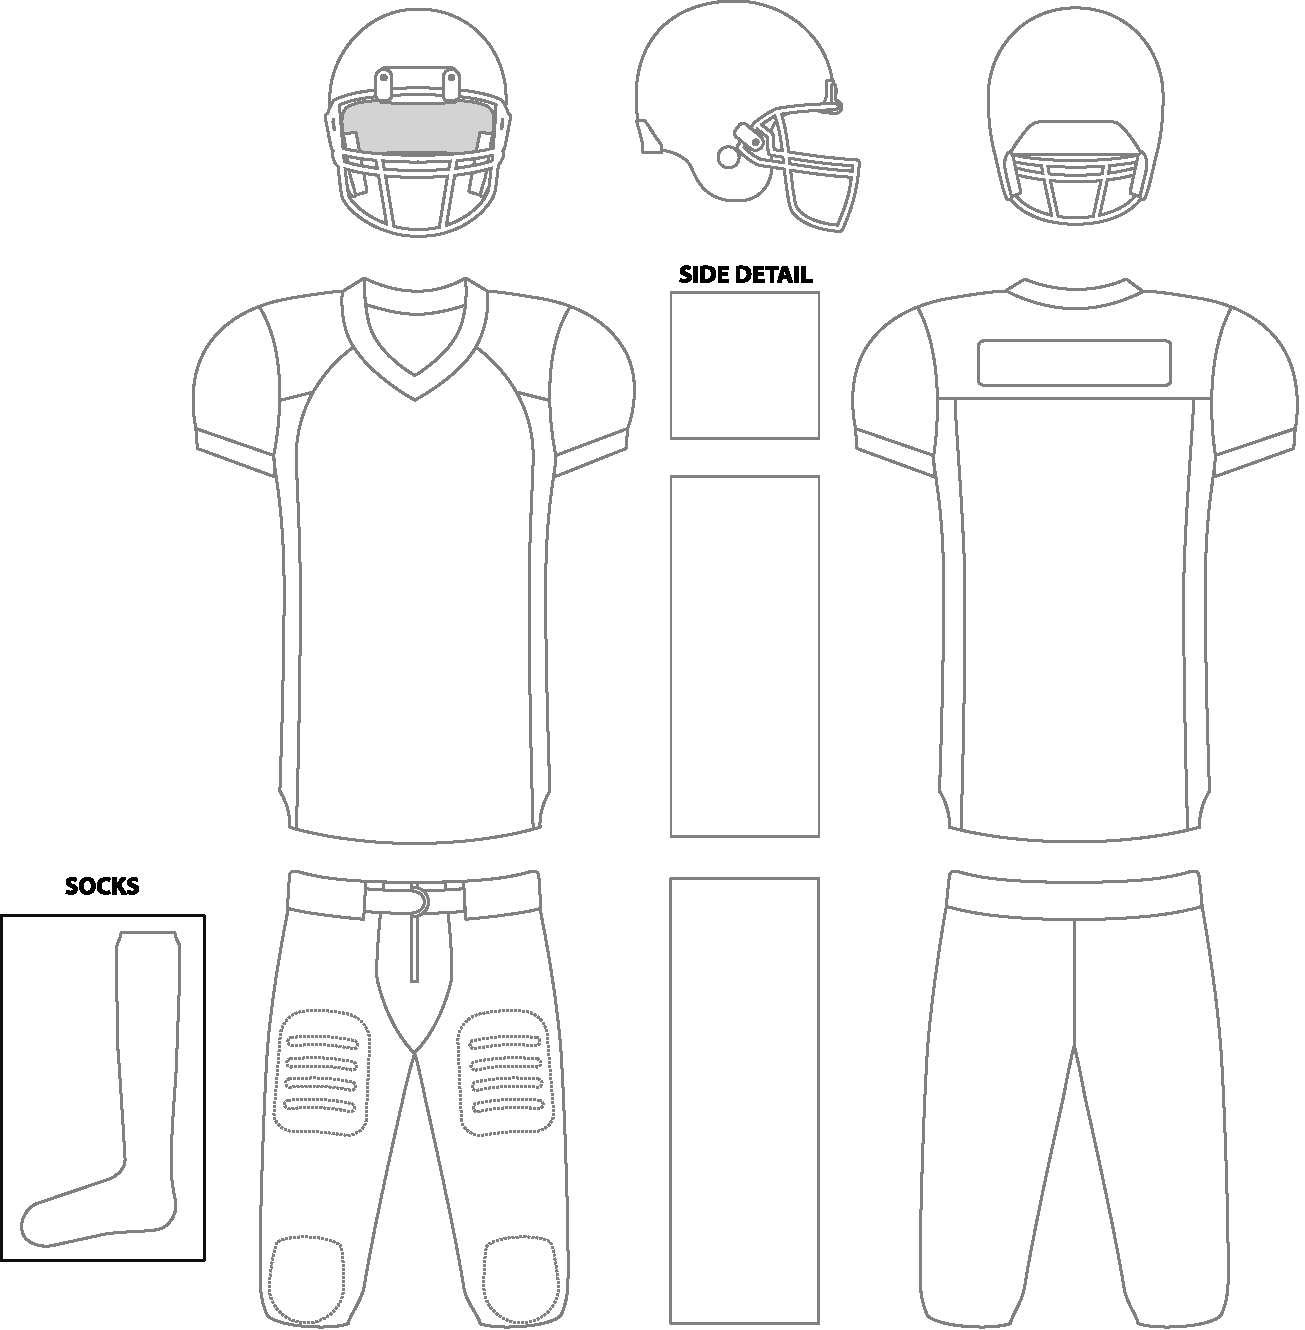 Download 40 Uniforms Ideas In 2021 Shirt Template Football Coloring Pages Basketball Uniforms